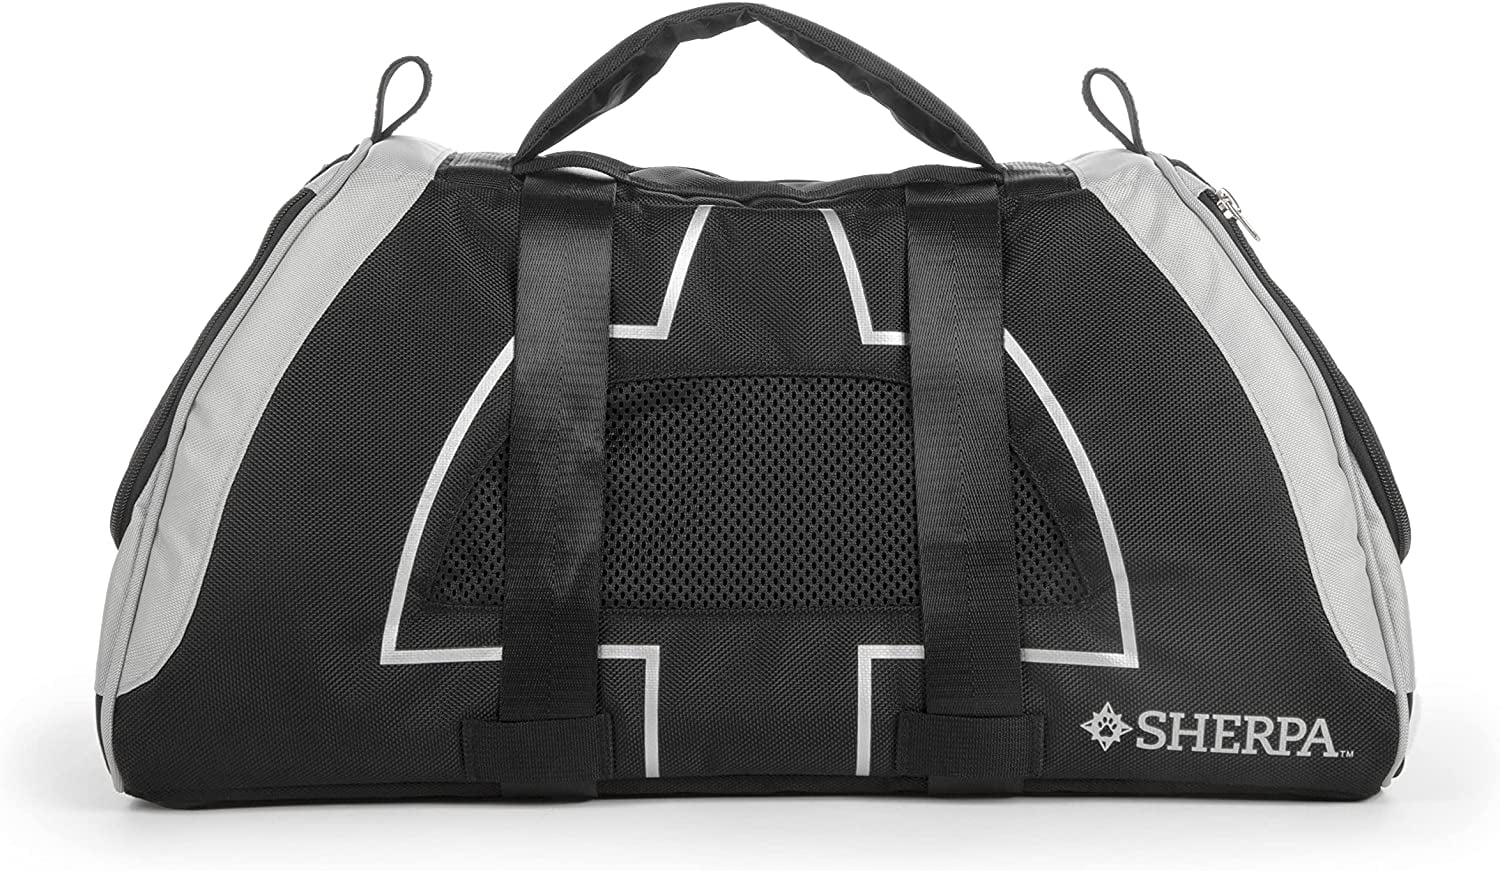  Sherpa Tote Around Town Travel Pet Carrier with Stay Clean  Technology - Black, Small : Pet Supplies